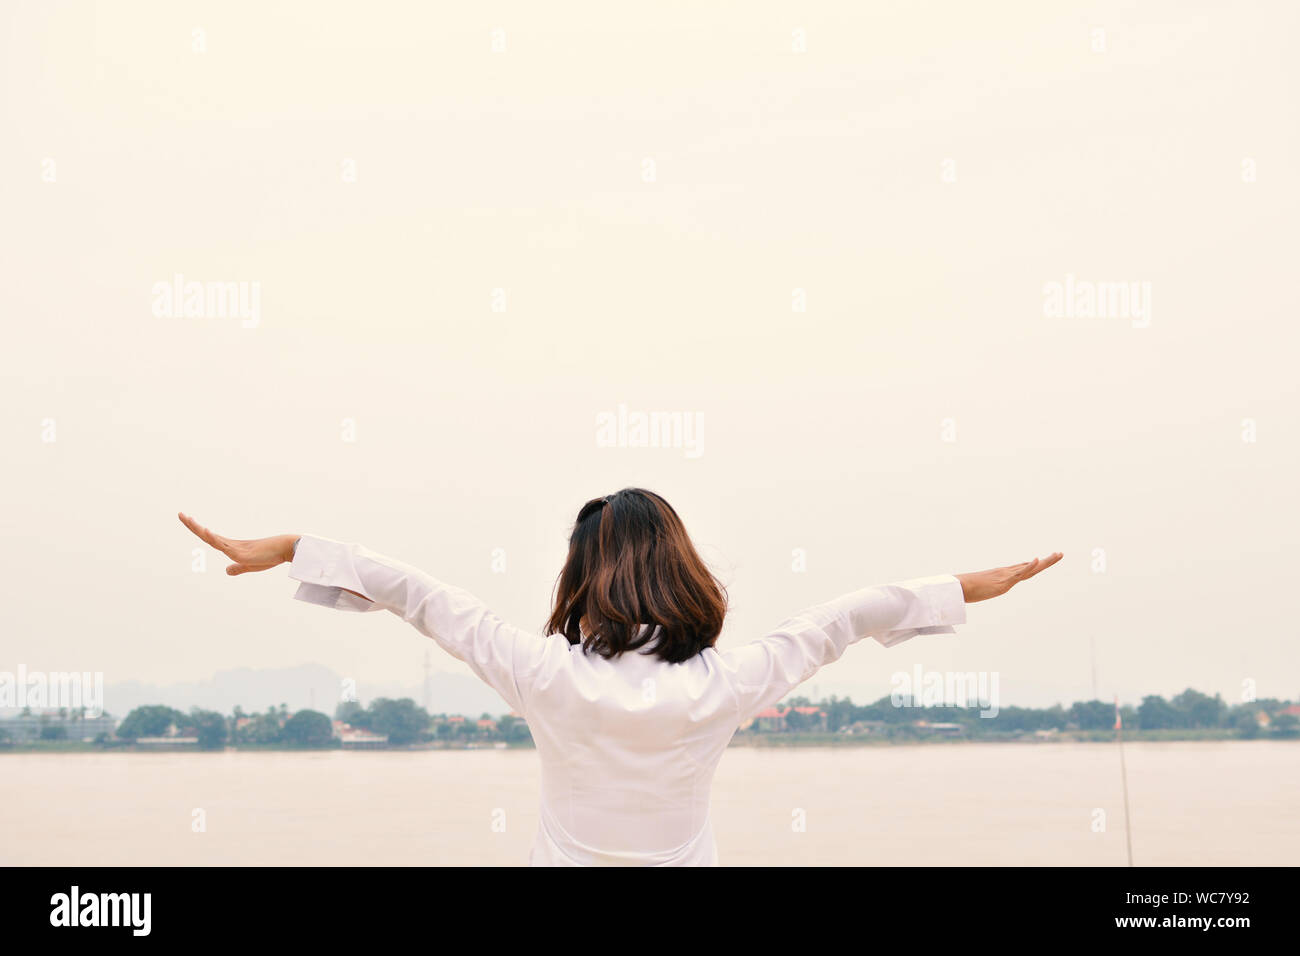 Rear View Of Woman With Arms Outstretched Stock Photo